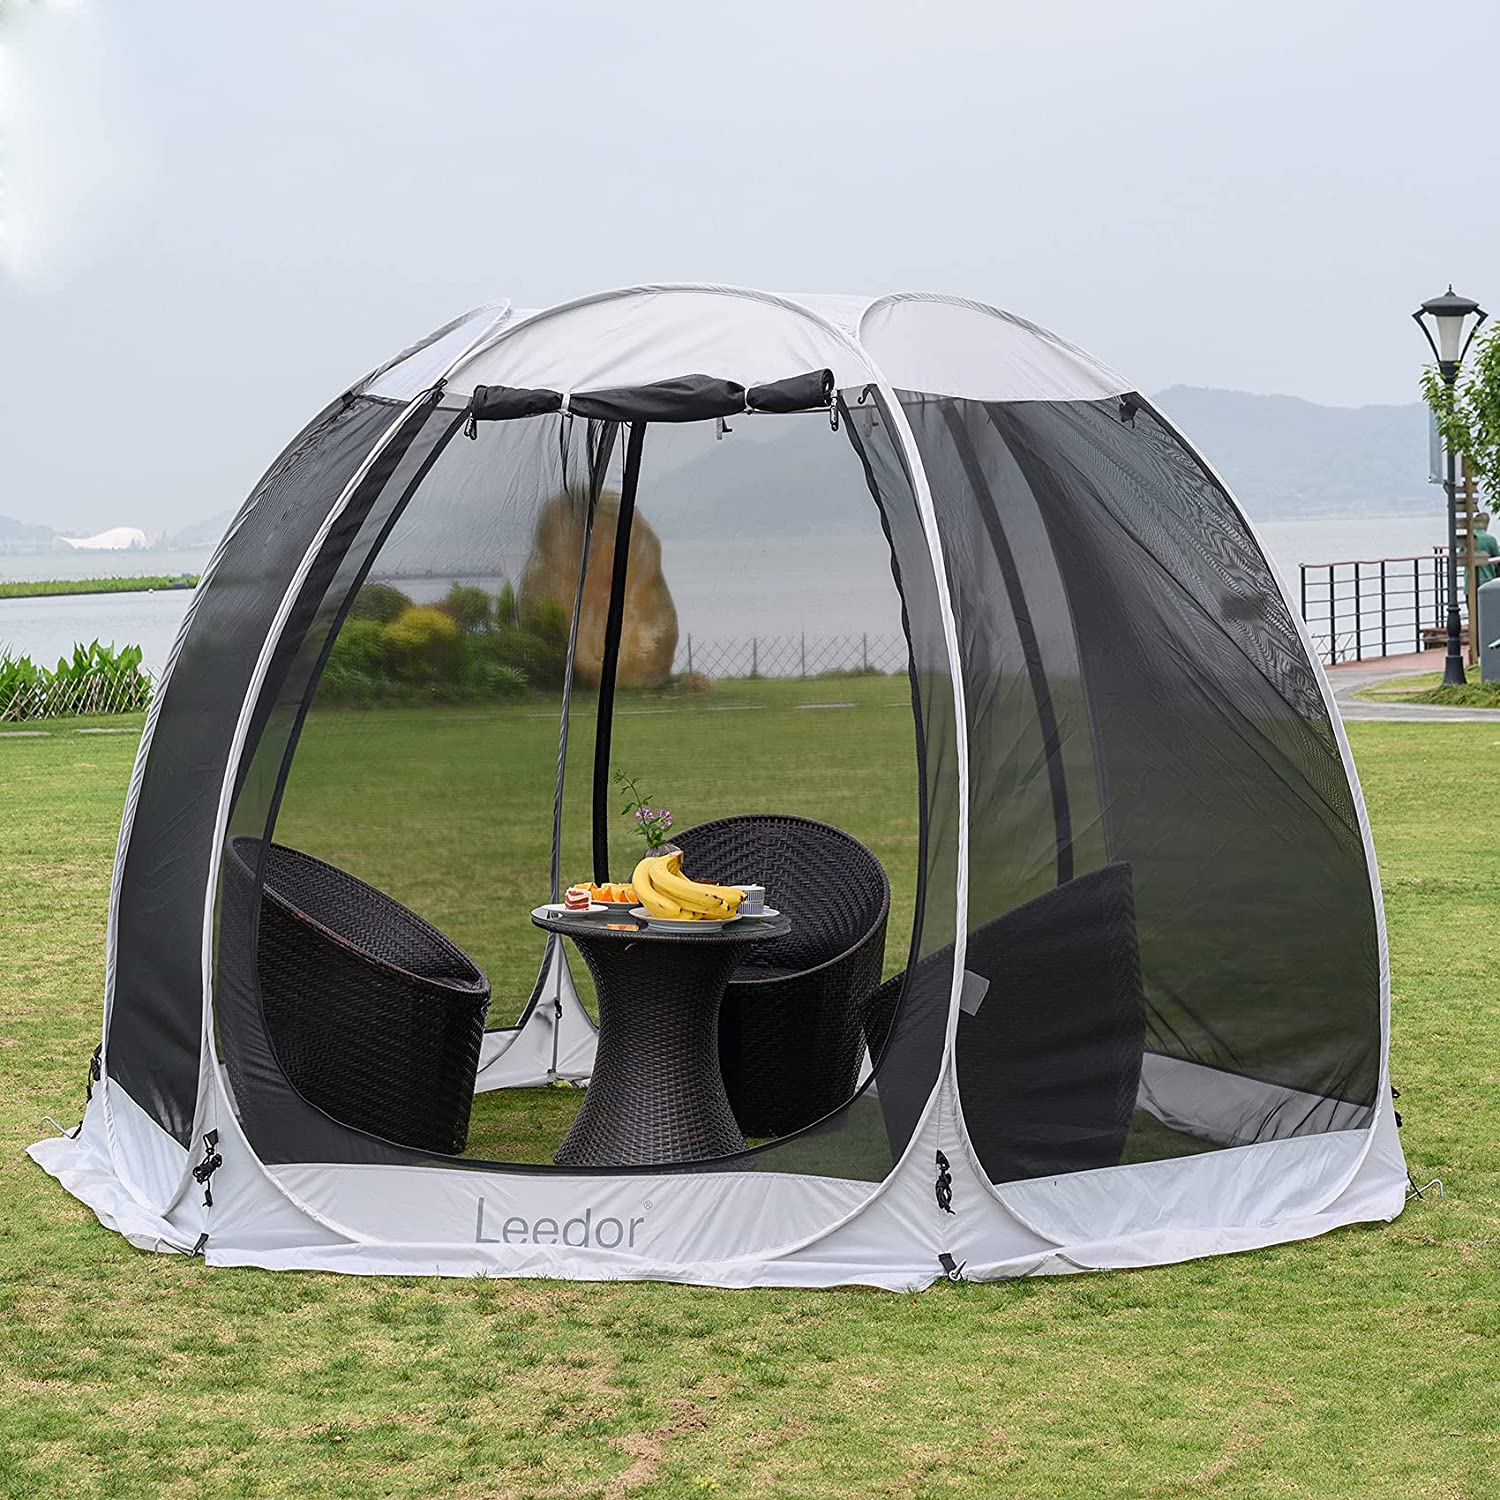 LEEDOR Gazebos for Patios Screen House Room 4-6 Person Canopy Mosquito Net Camping Tent Dining